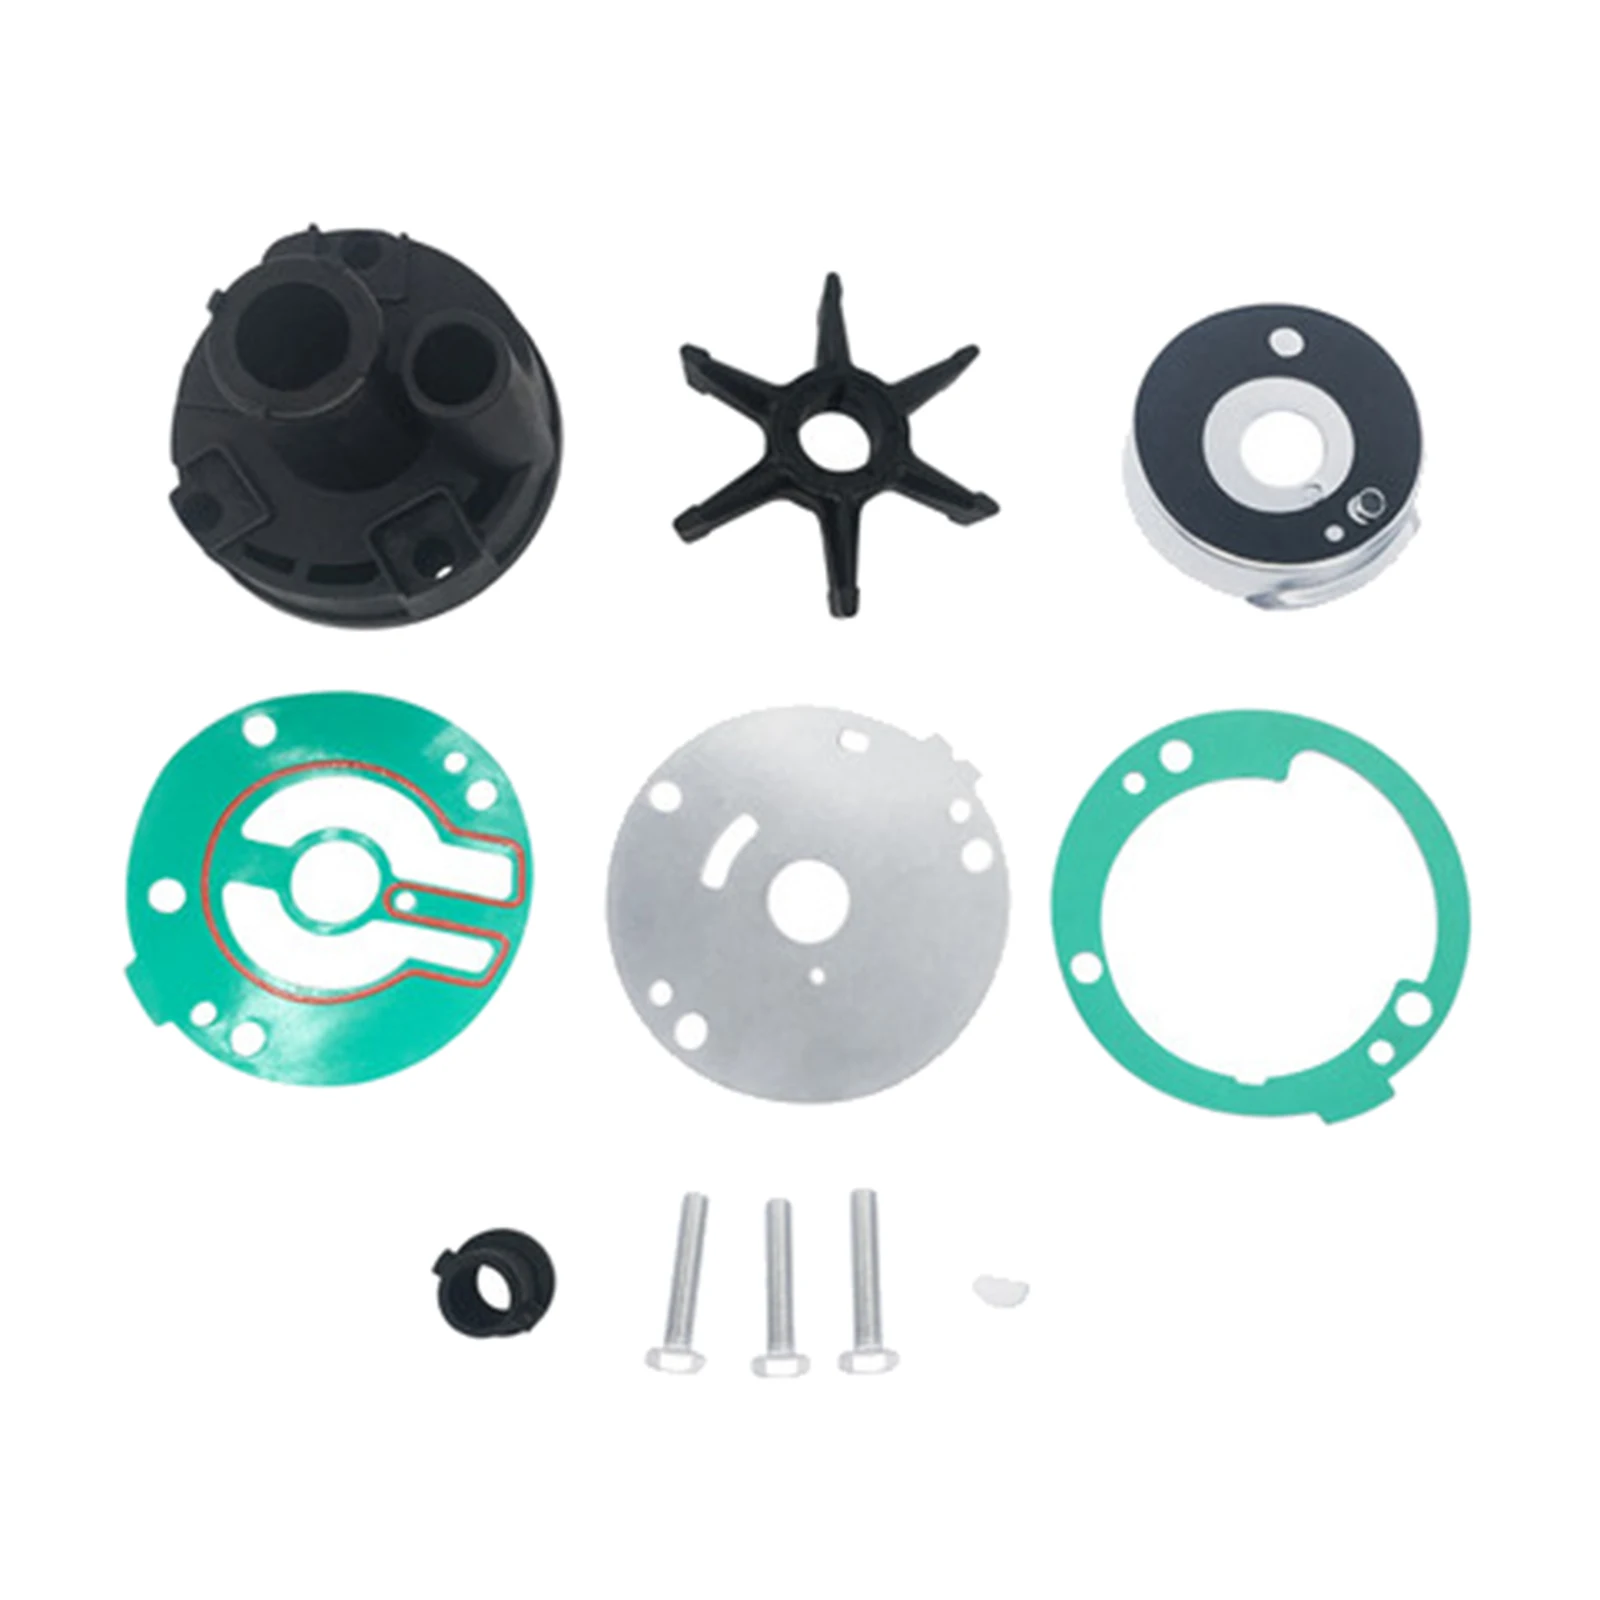 Water Pump Impeller Kit for Yamaha 25HP 30HP 689-W0078-05 Outboard Engines